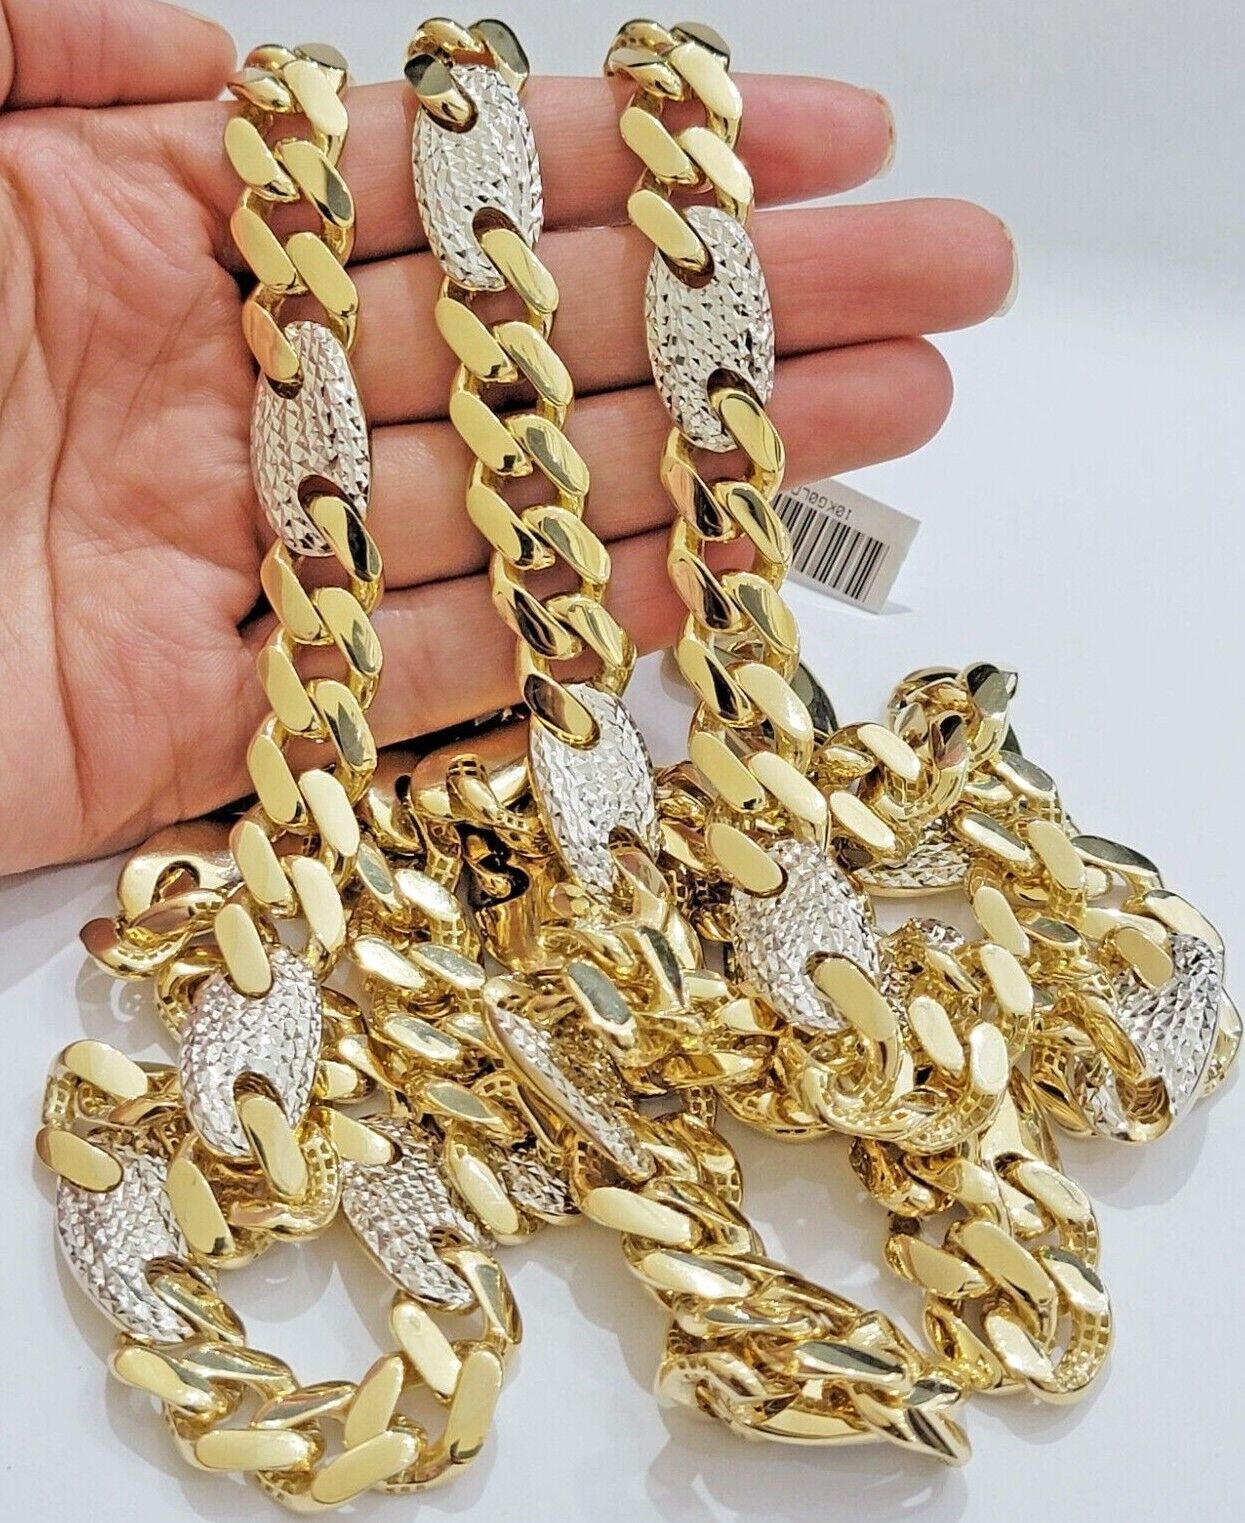 14mm Miami Cuban Mariner Link Chain Necklace Diamond Cuts Real 10K Yellow Gold